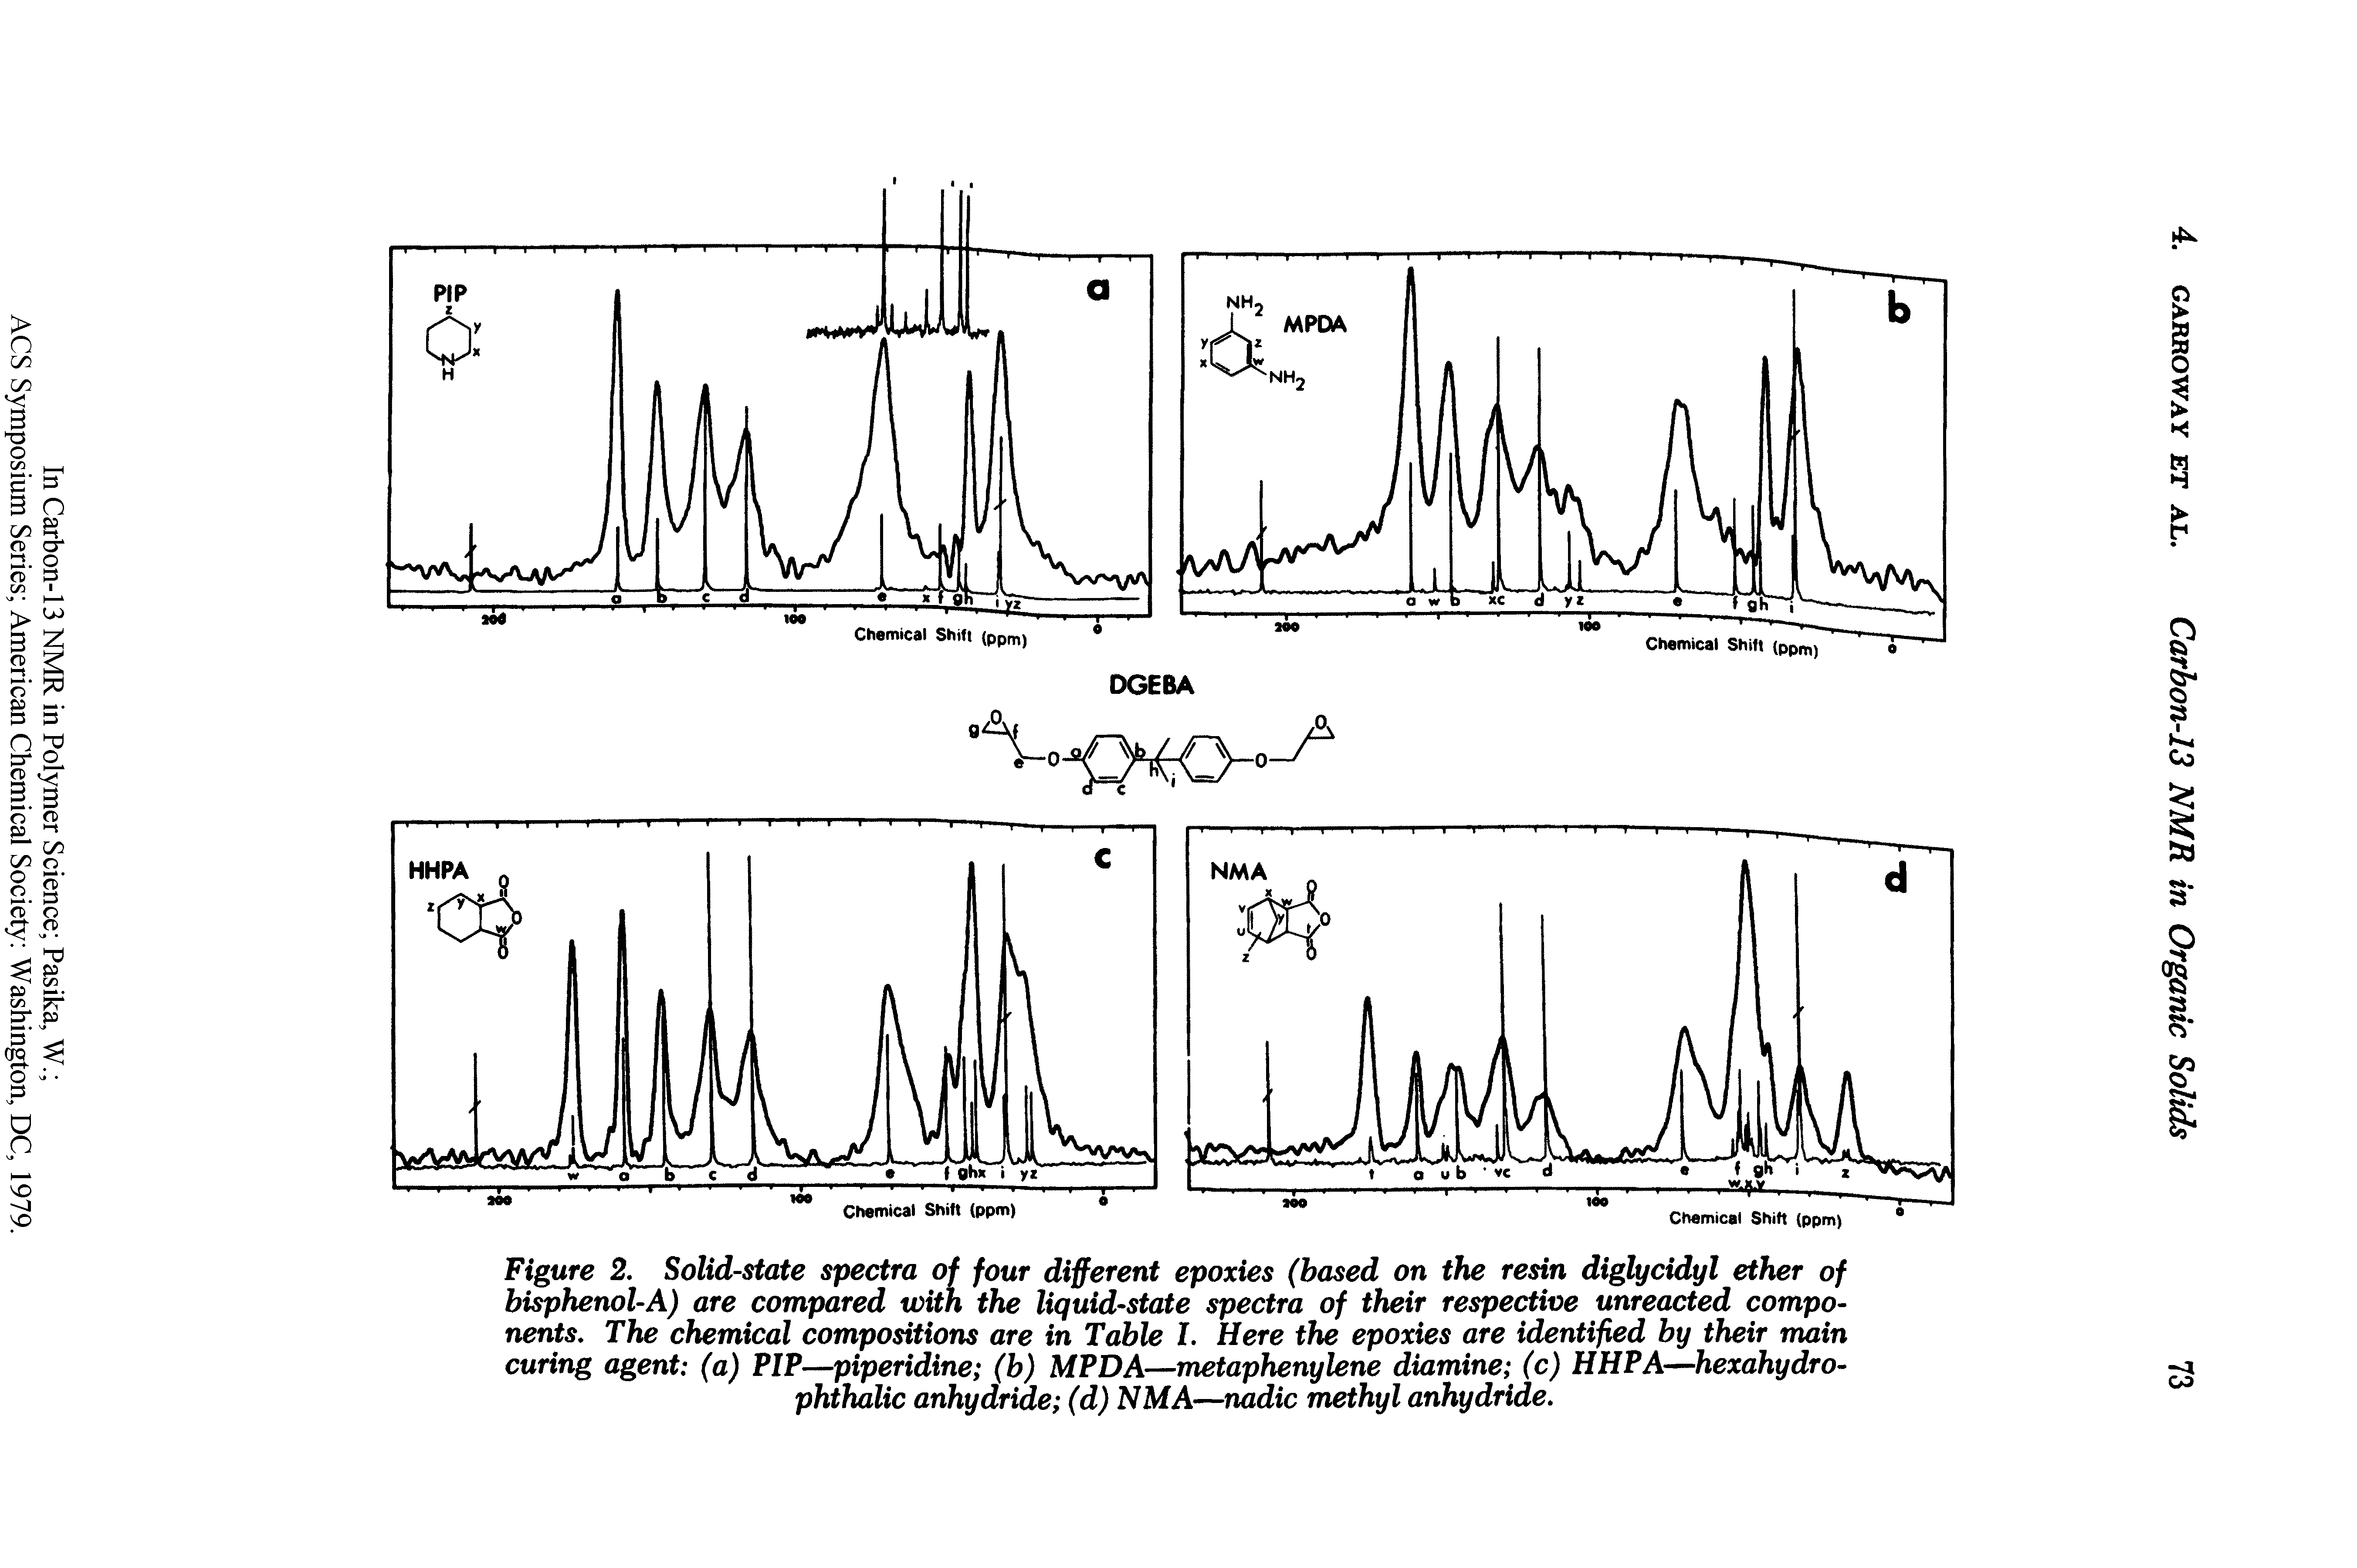 Figure 2. Solid-state spectra of four different epoxies (hosed on the resin diglycidyl ether of bisphenol-A) are compared with the liquid-state spectra of their respective unreacted components, The chemical compositions are in Table I. Here the epoxies are identified by their main curing agent (a) PIP—piperidine (b) MPDA—metaphenylene diamine (c) HHPA—hexahydro-phthalic anhydride (d) NMA—nadic methyl anhydride.